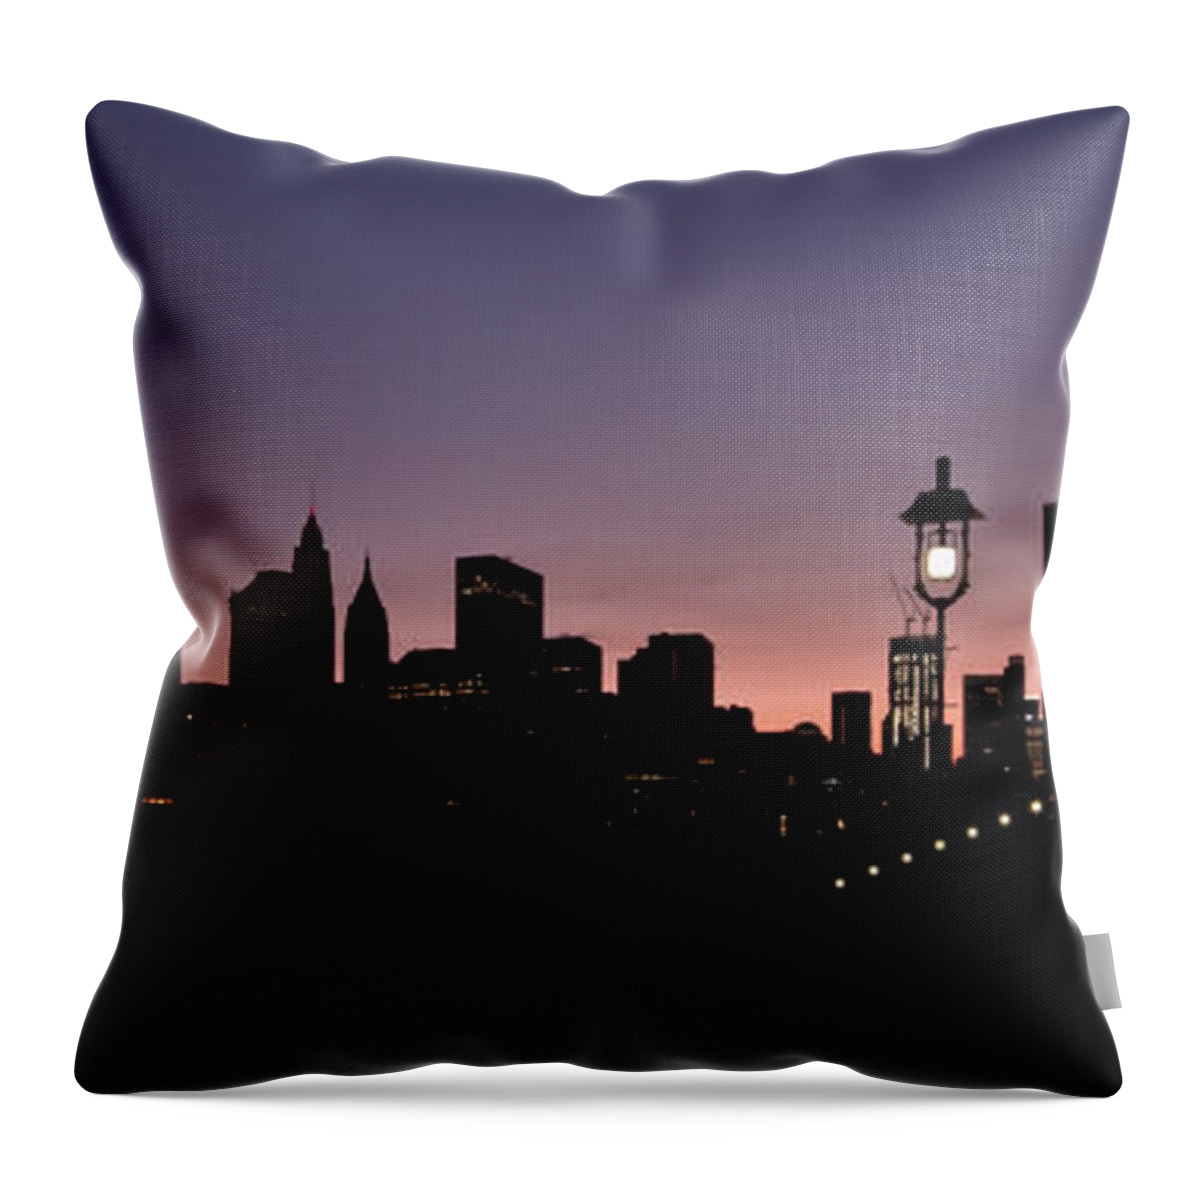 New York Throw Pillow featuring the photograph Slice Of The City by Evelina Kremsdorf